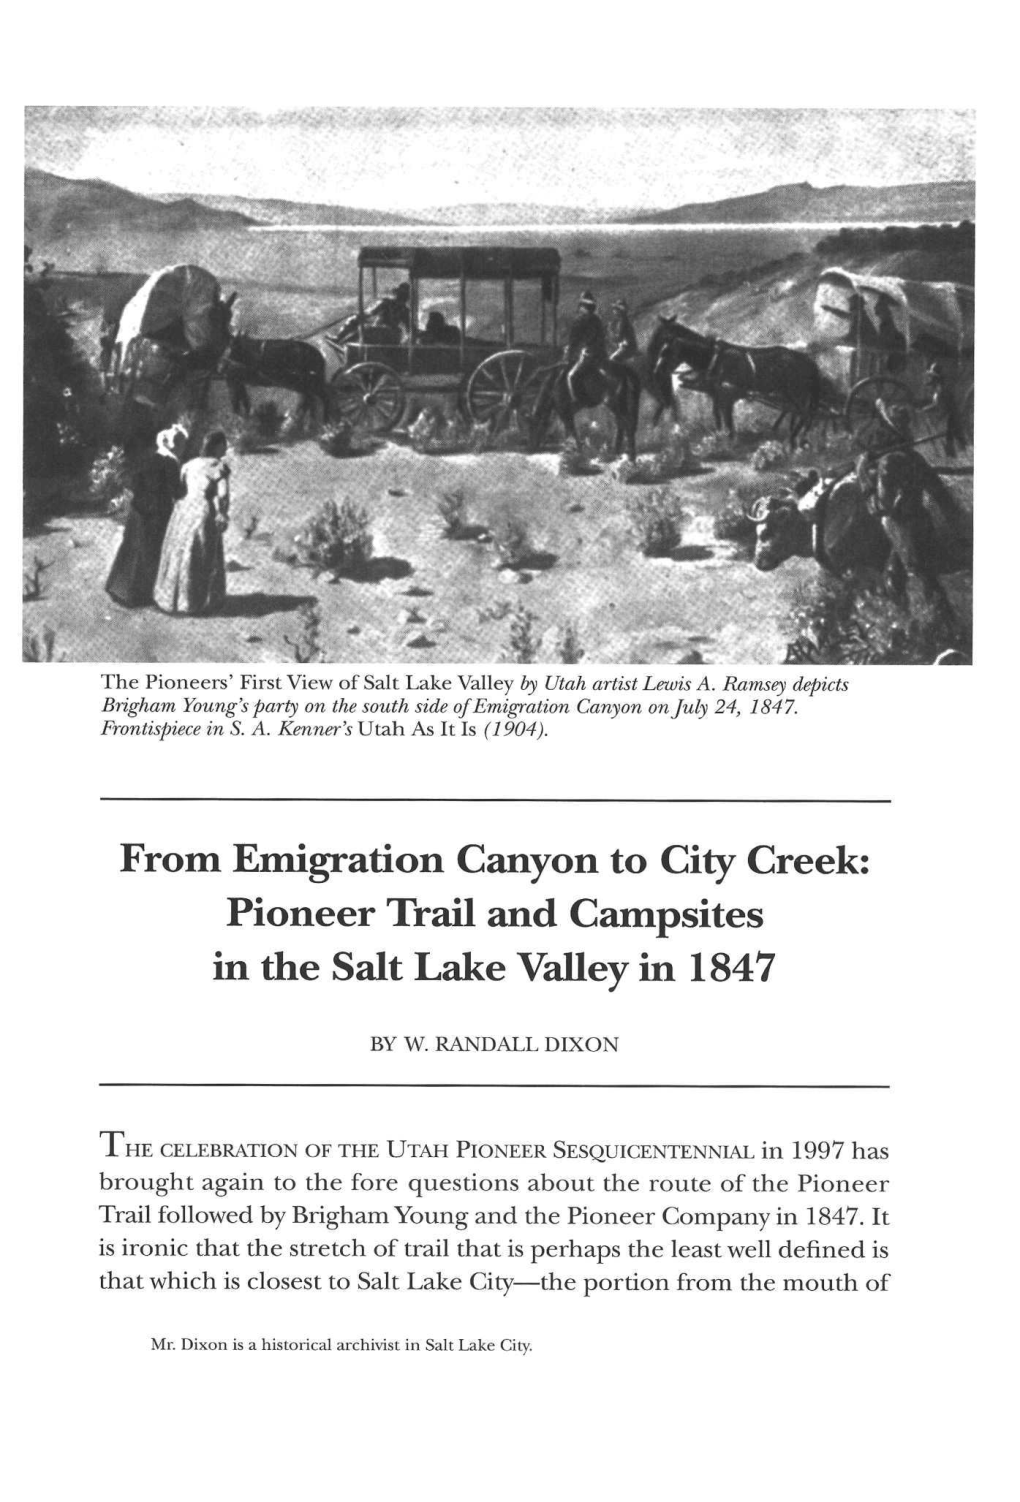 Pioneer Trail and Campsites in the Salt Lake Valley in 1847